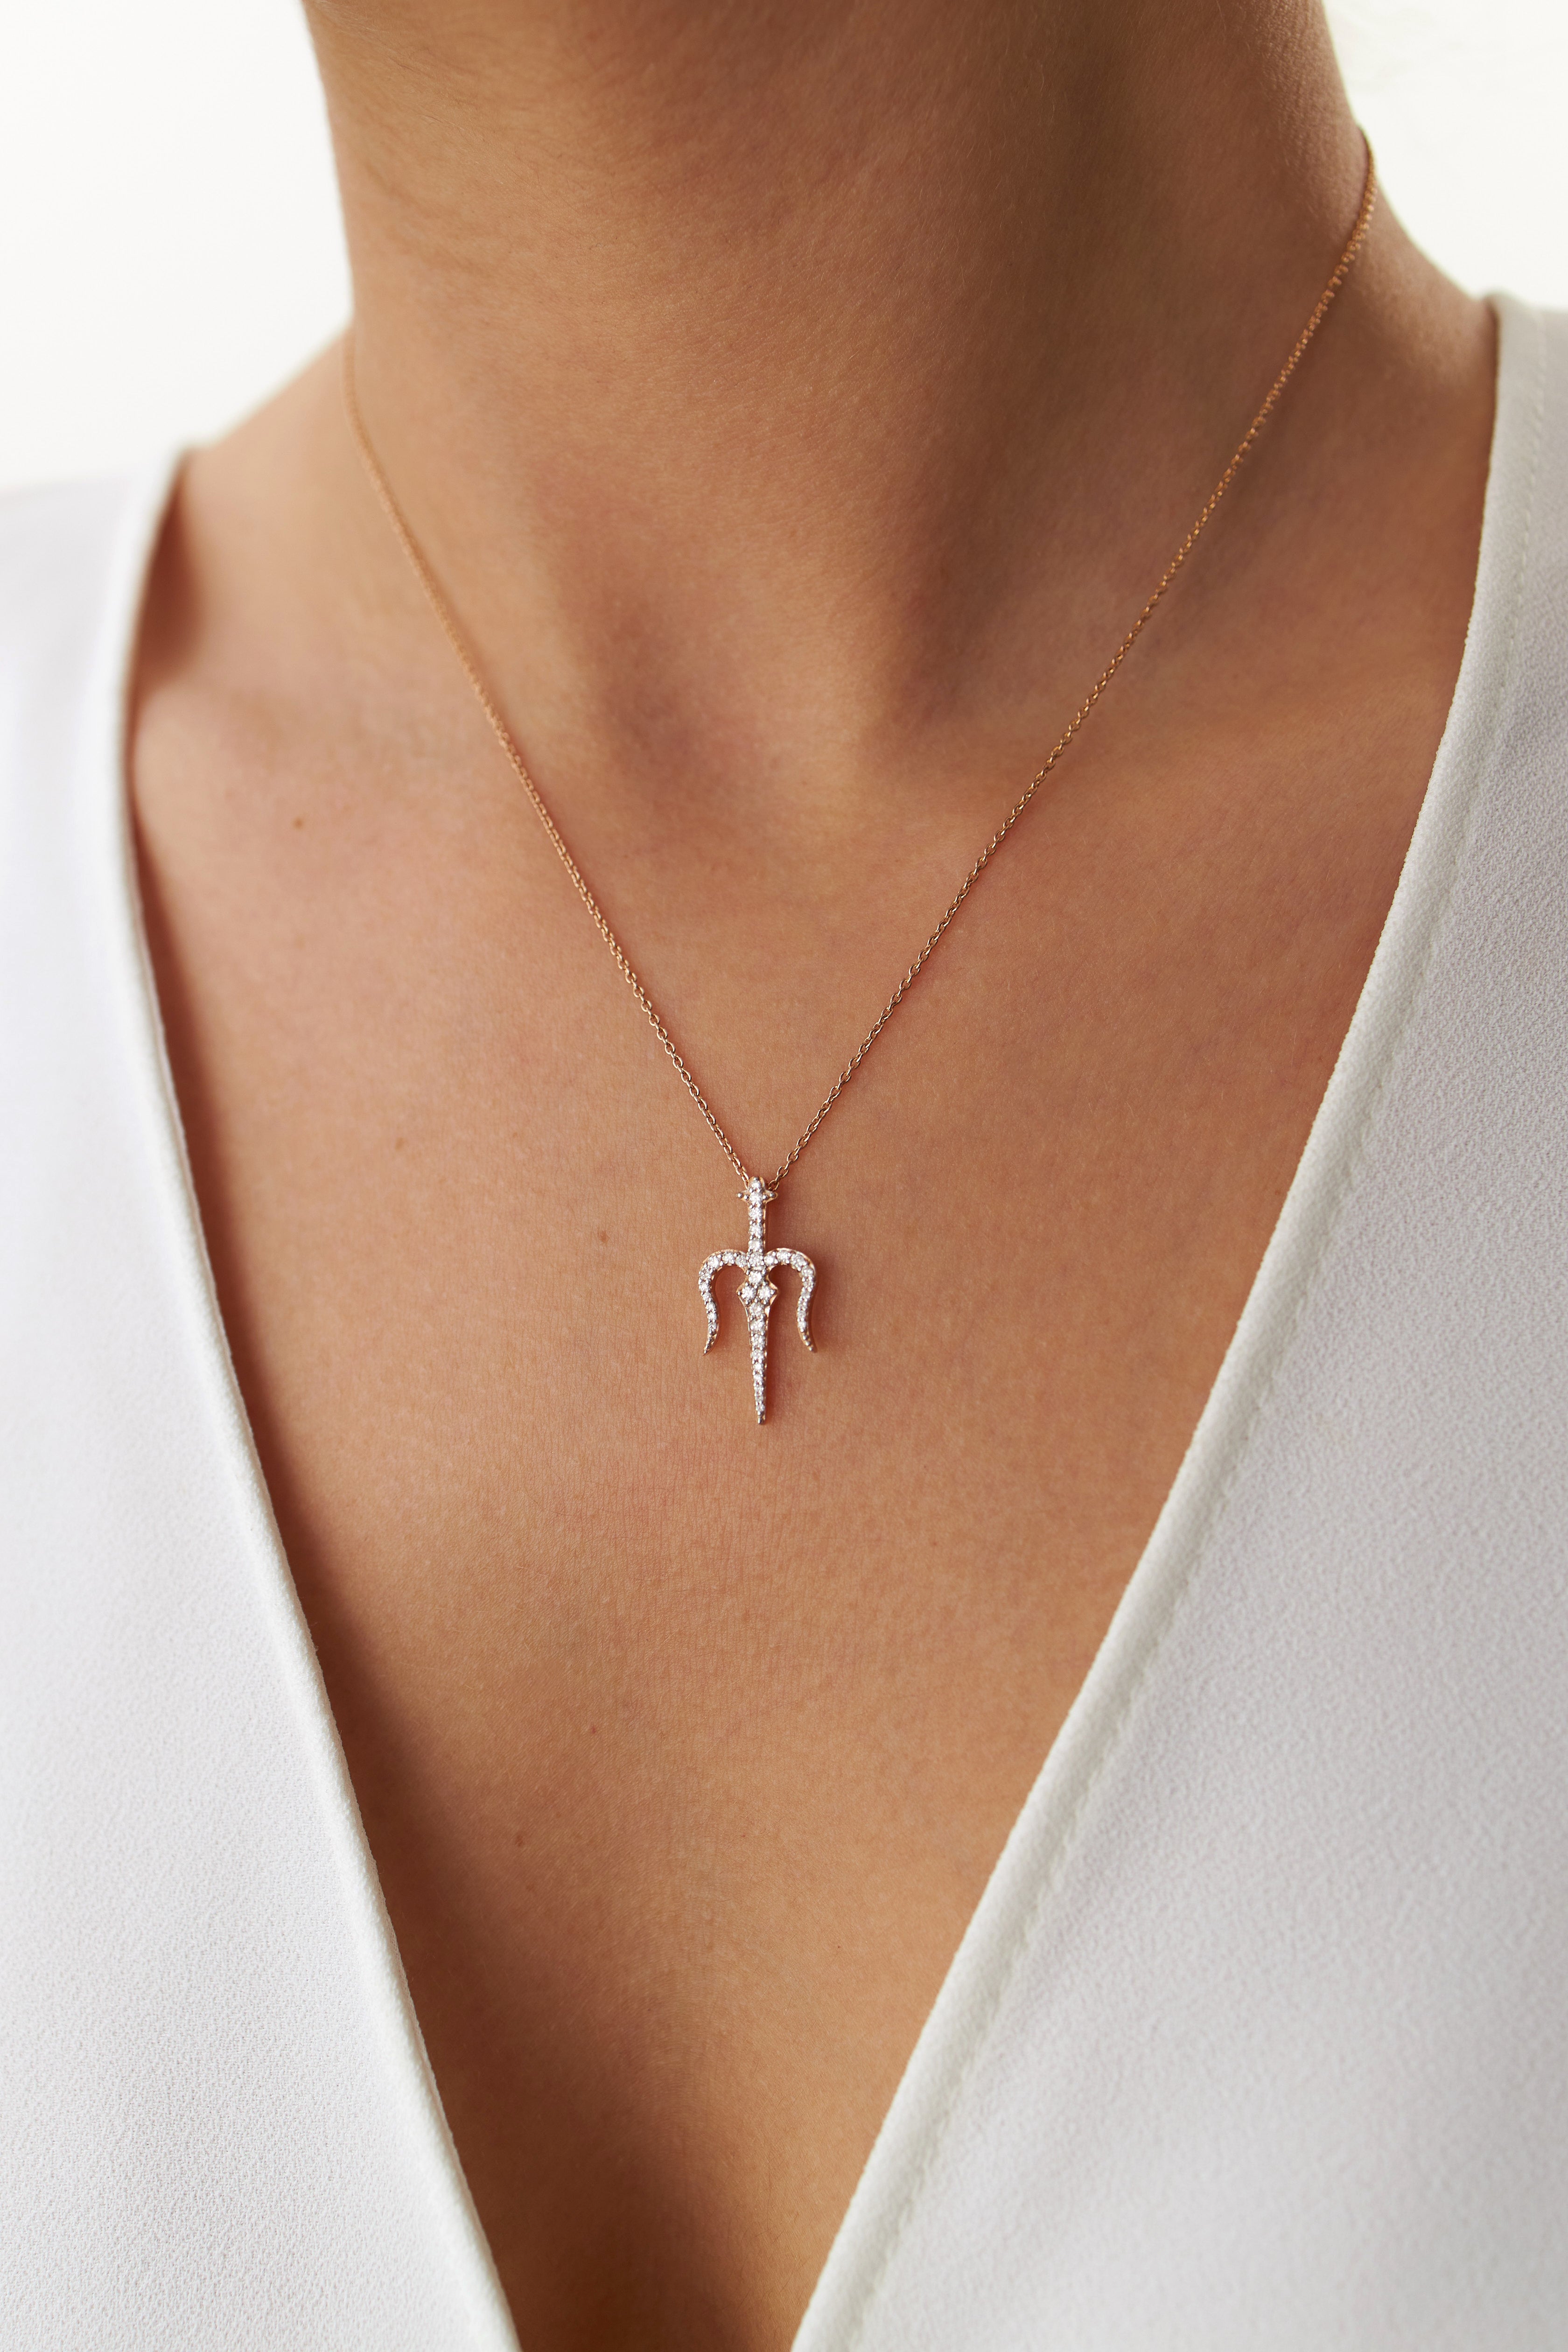 Diamond Trident Necklace Available in 14K and 18K Gold